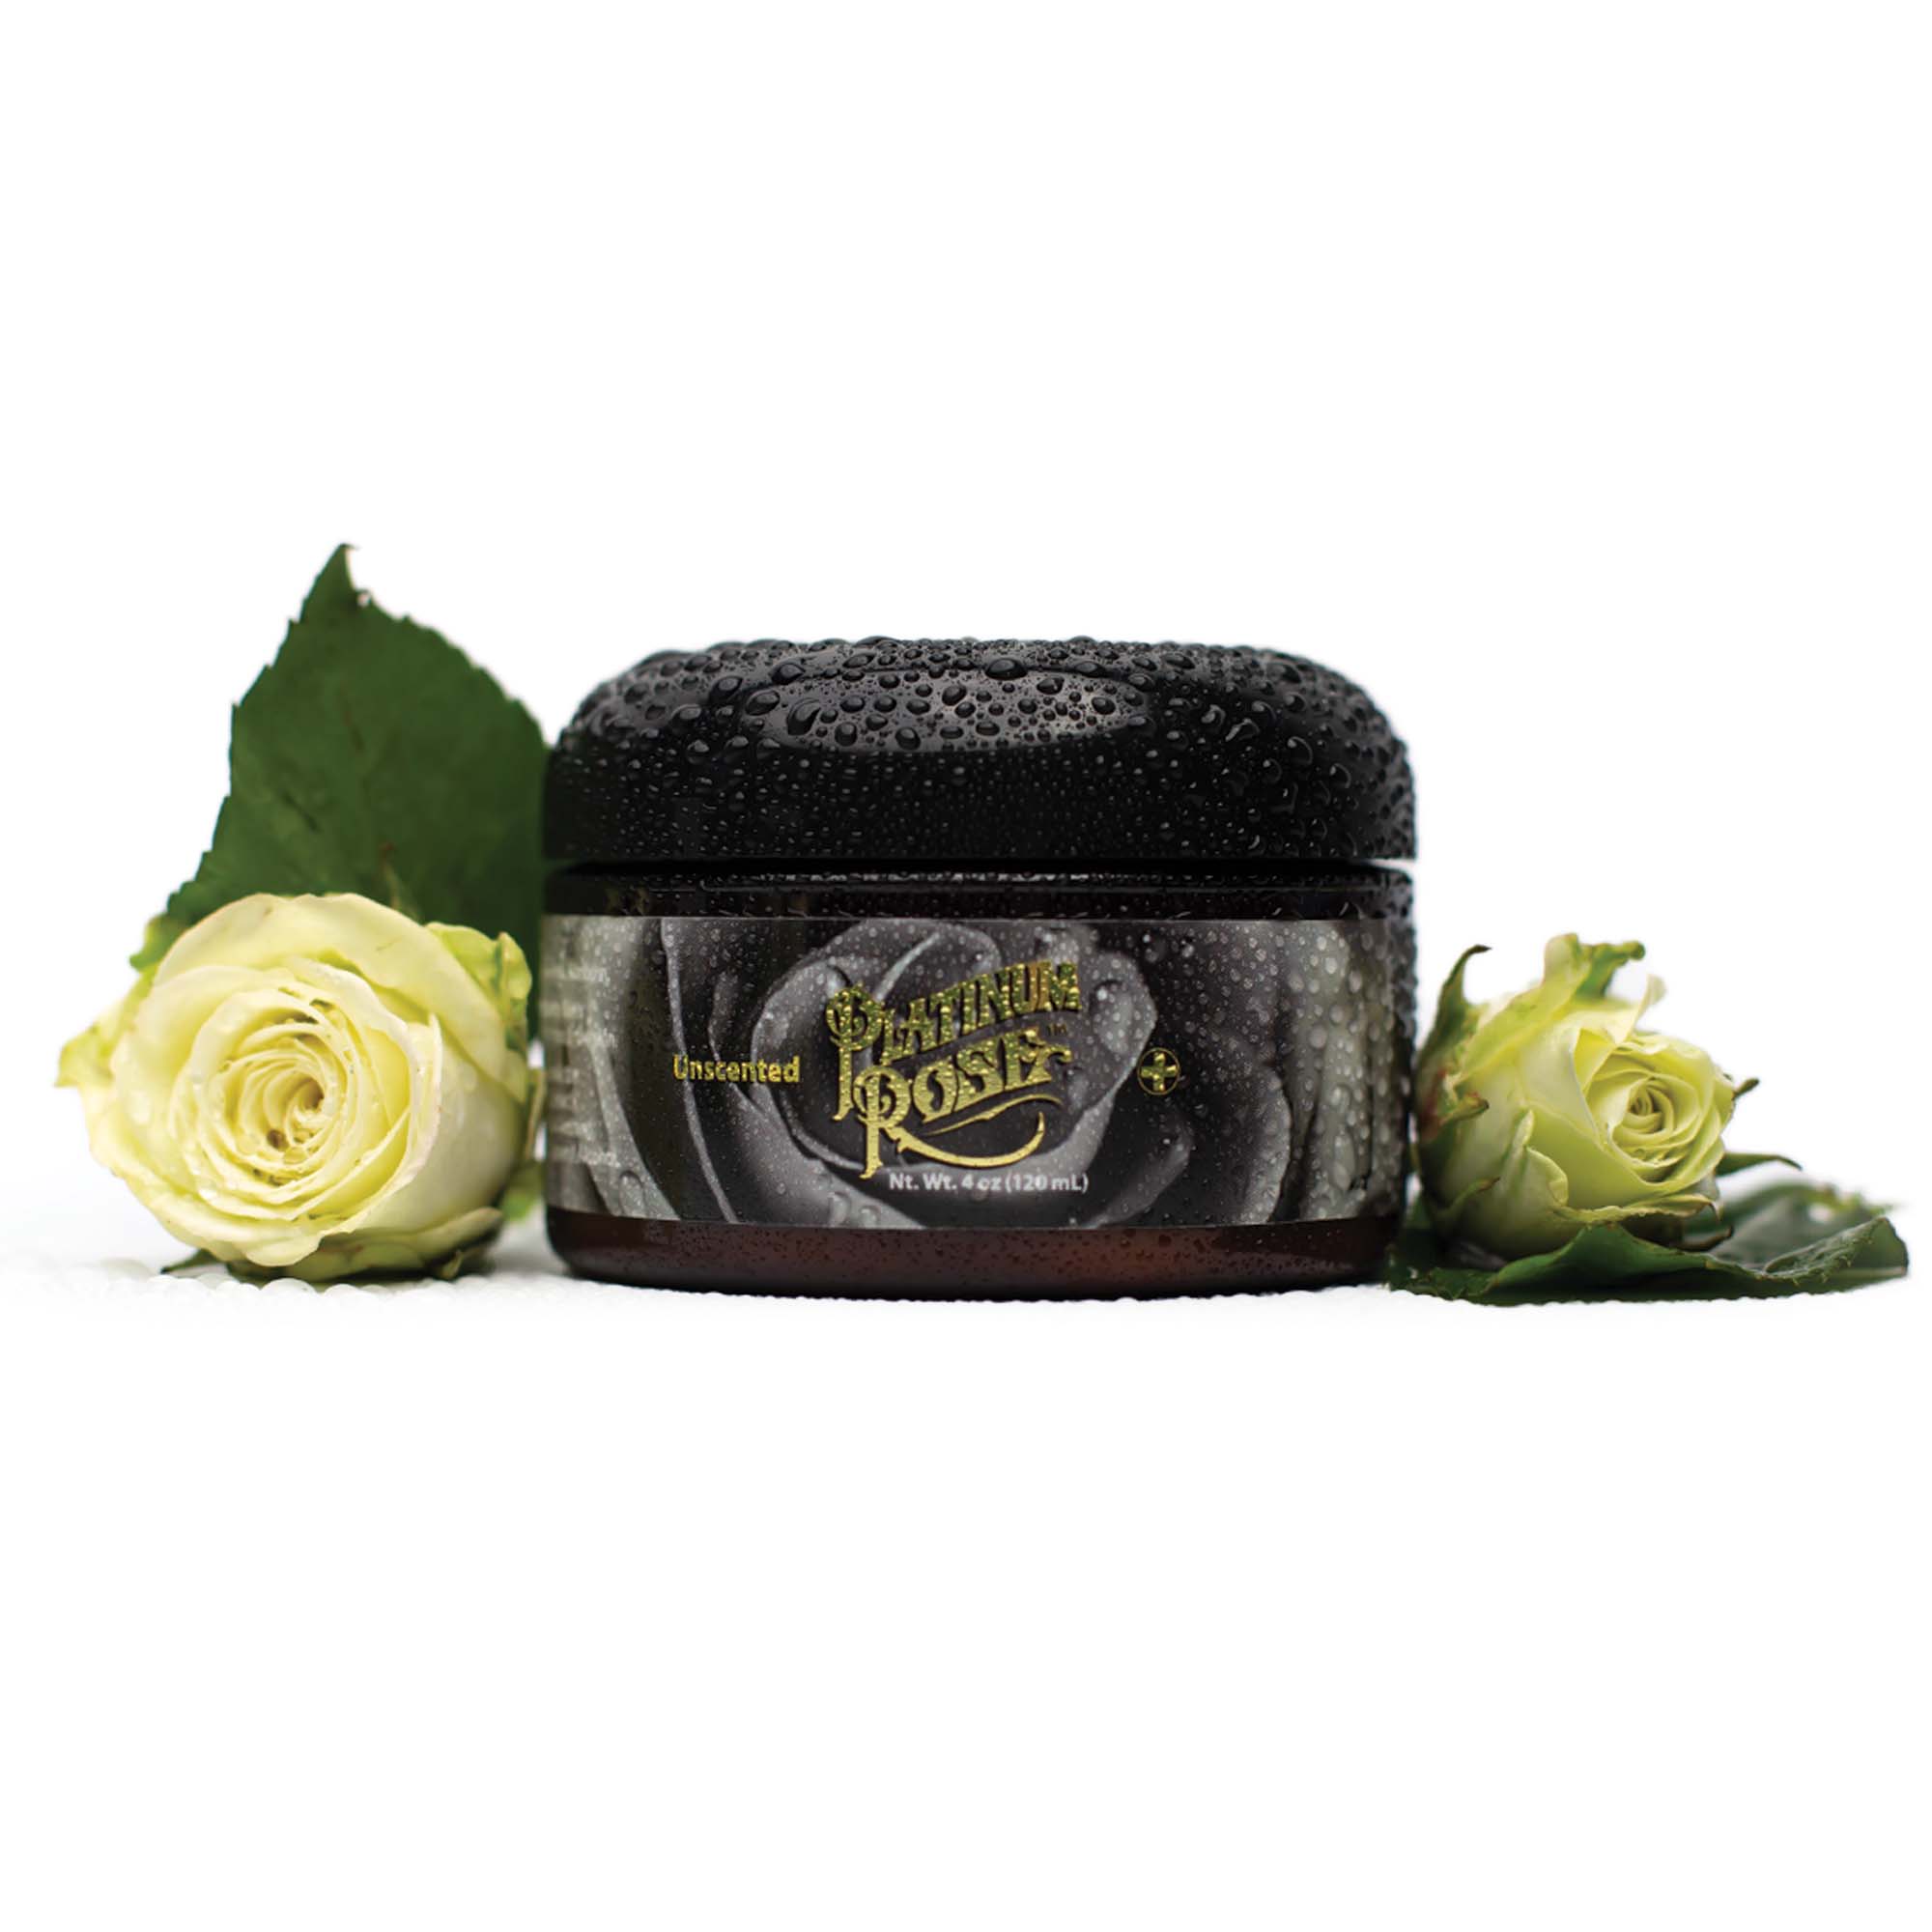 A 4oz Jar of unscented Platinum Rose tattoo Aftercare Surrounded by Freshly Cut White Roses